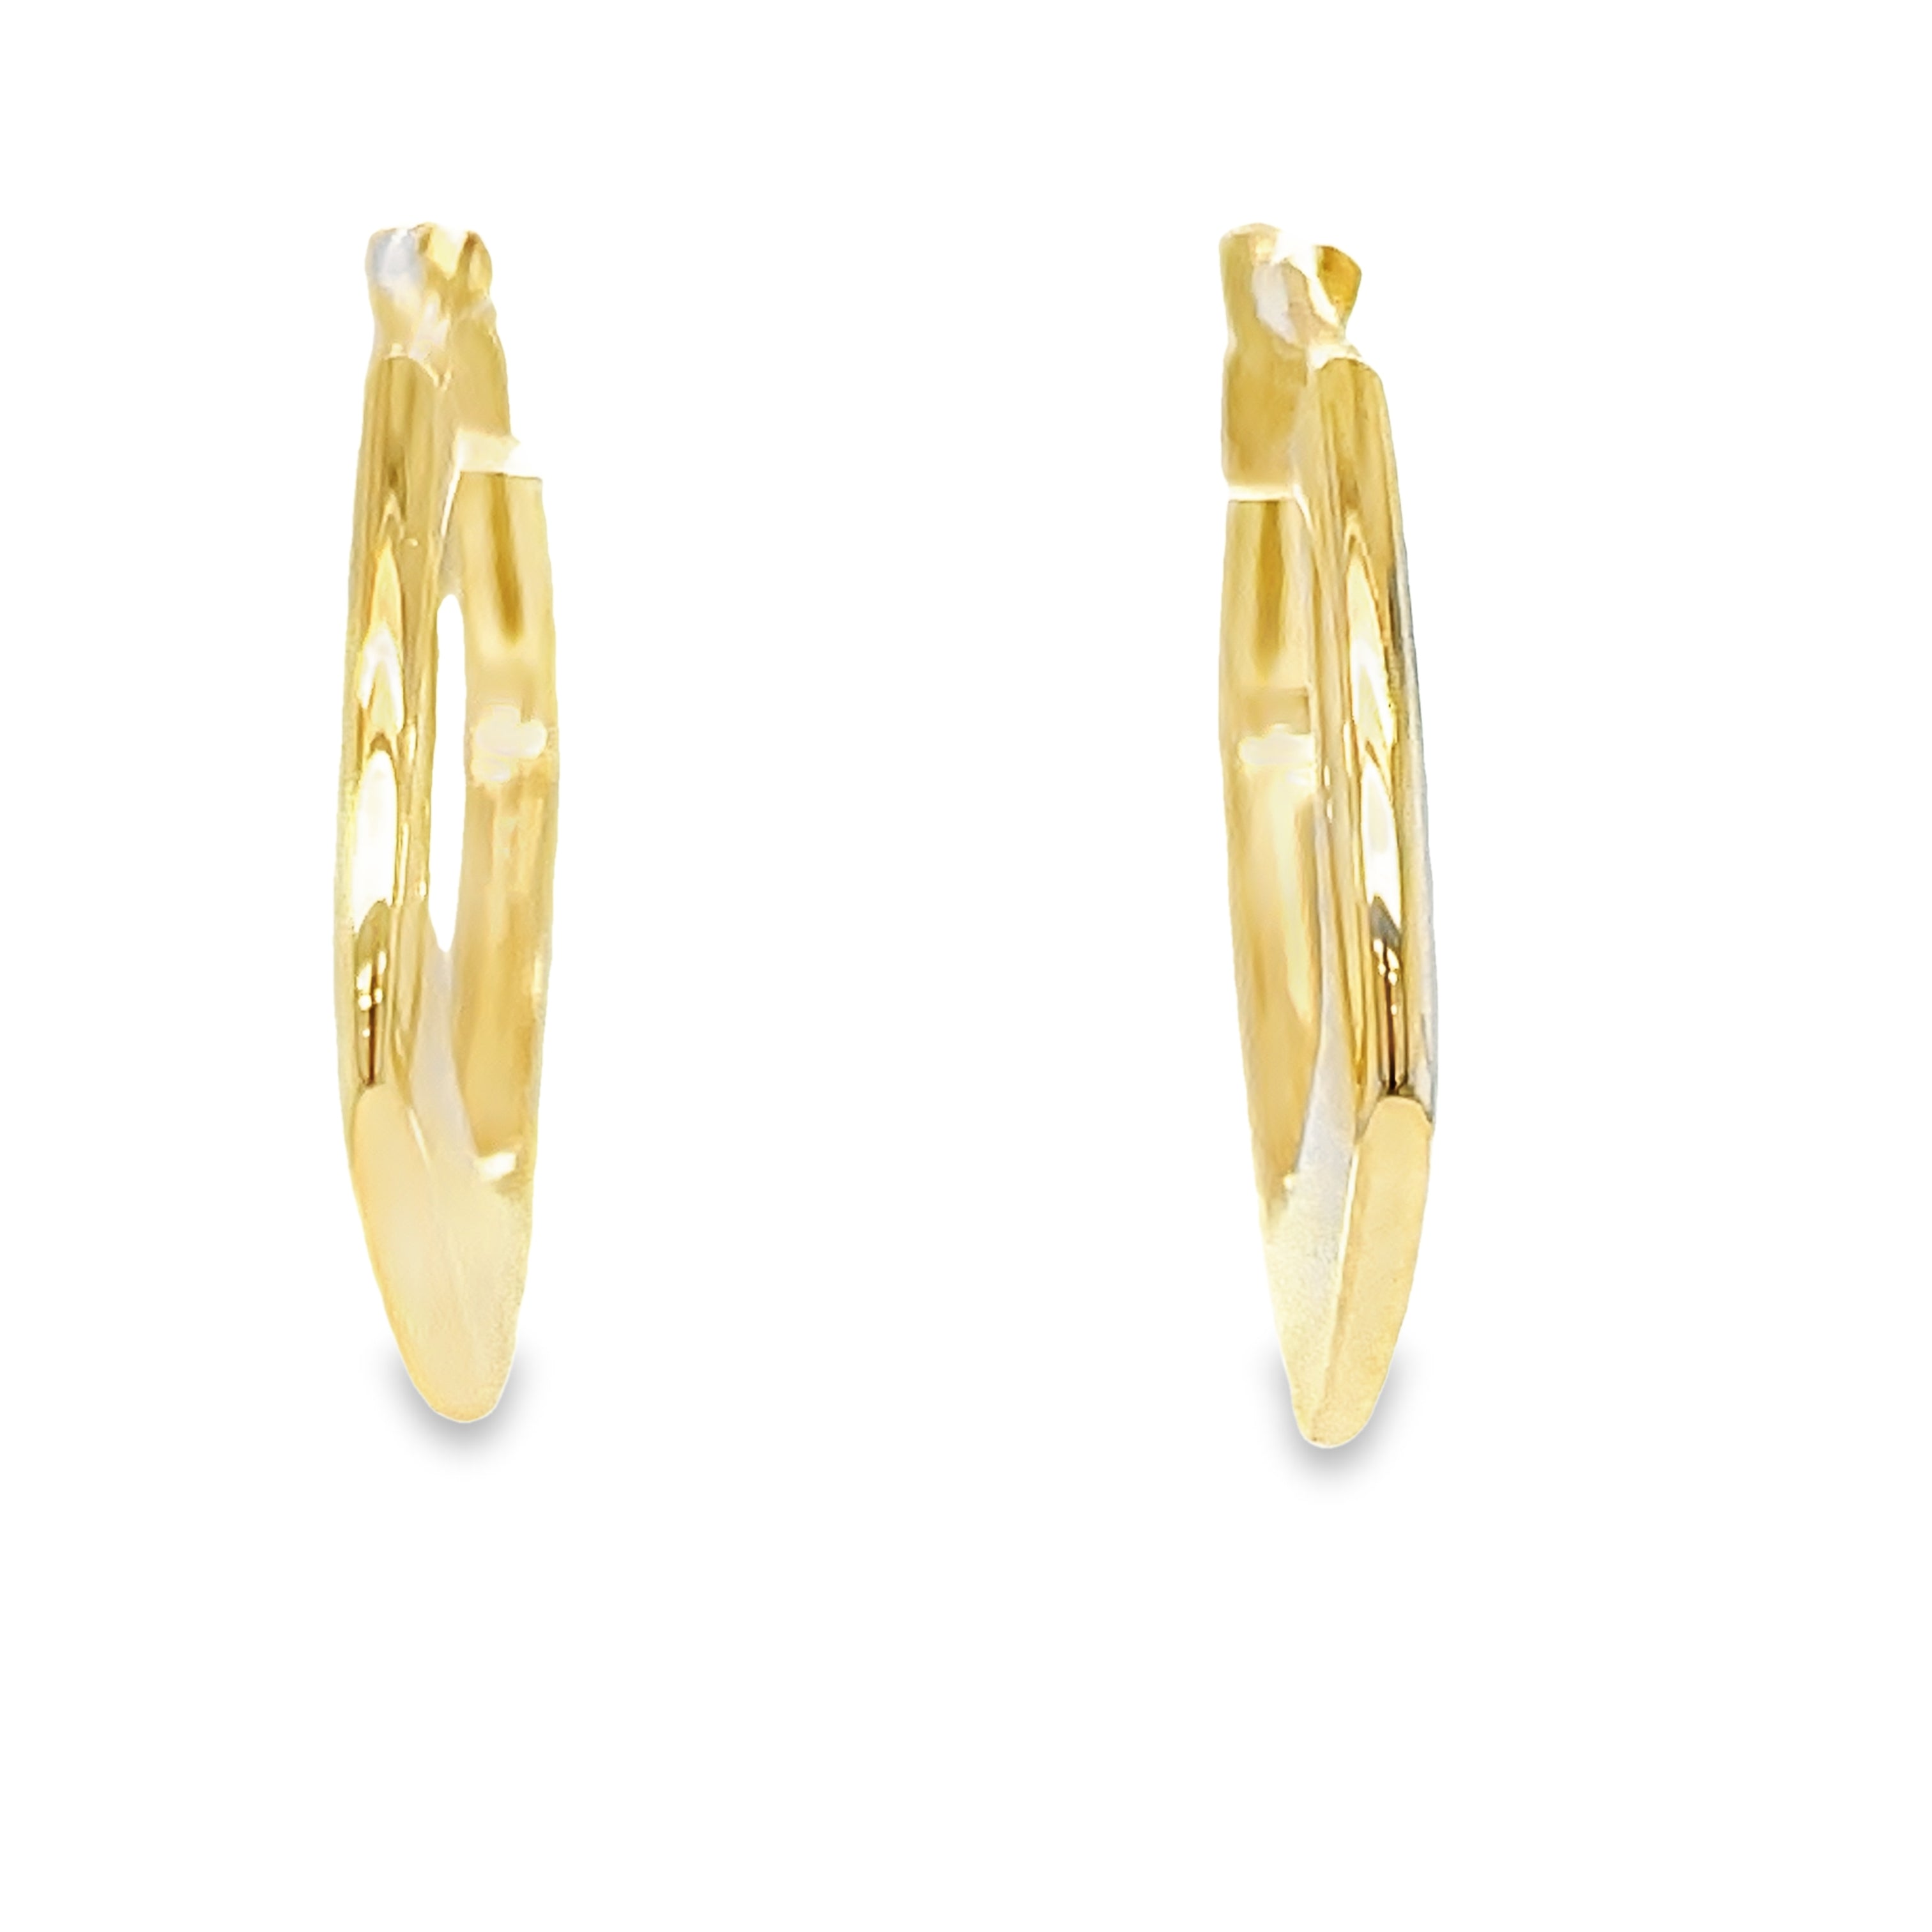 Experience elegance and style with our 14k Italian thin square Yellow Gold Small Hoop Earrings! These beautiful earrings are crafted with 14k yellow gold and measure 2.30 mm thick. The secure lever system ensures they stay in place all day, making these 1" hoop earrings the perfect addition to any outfit. Elevate your look with these versatile and timeless earrings.